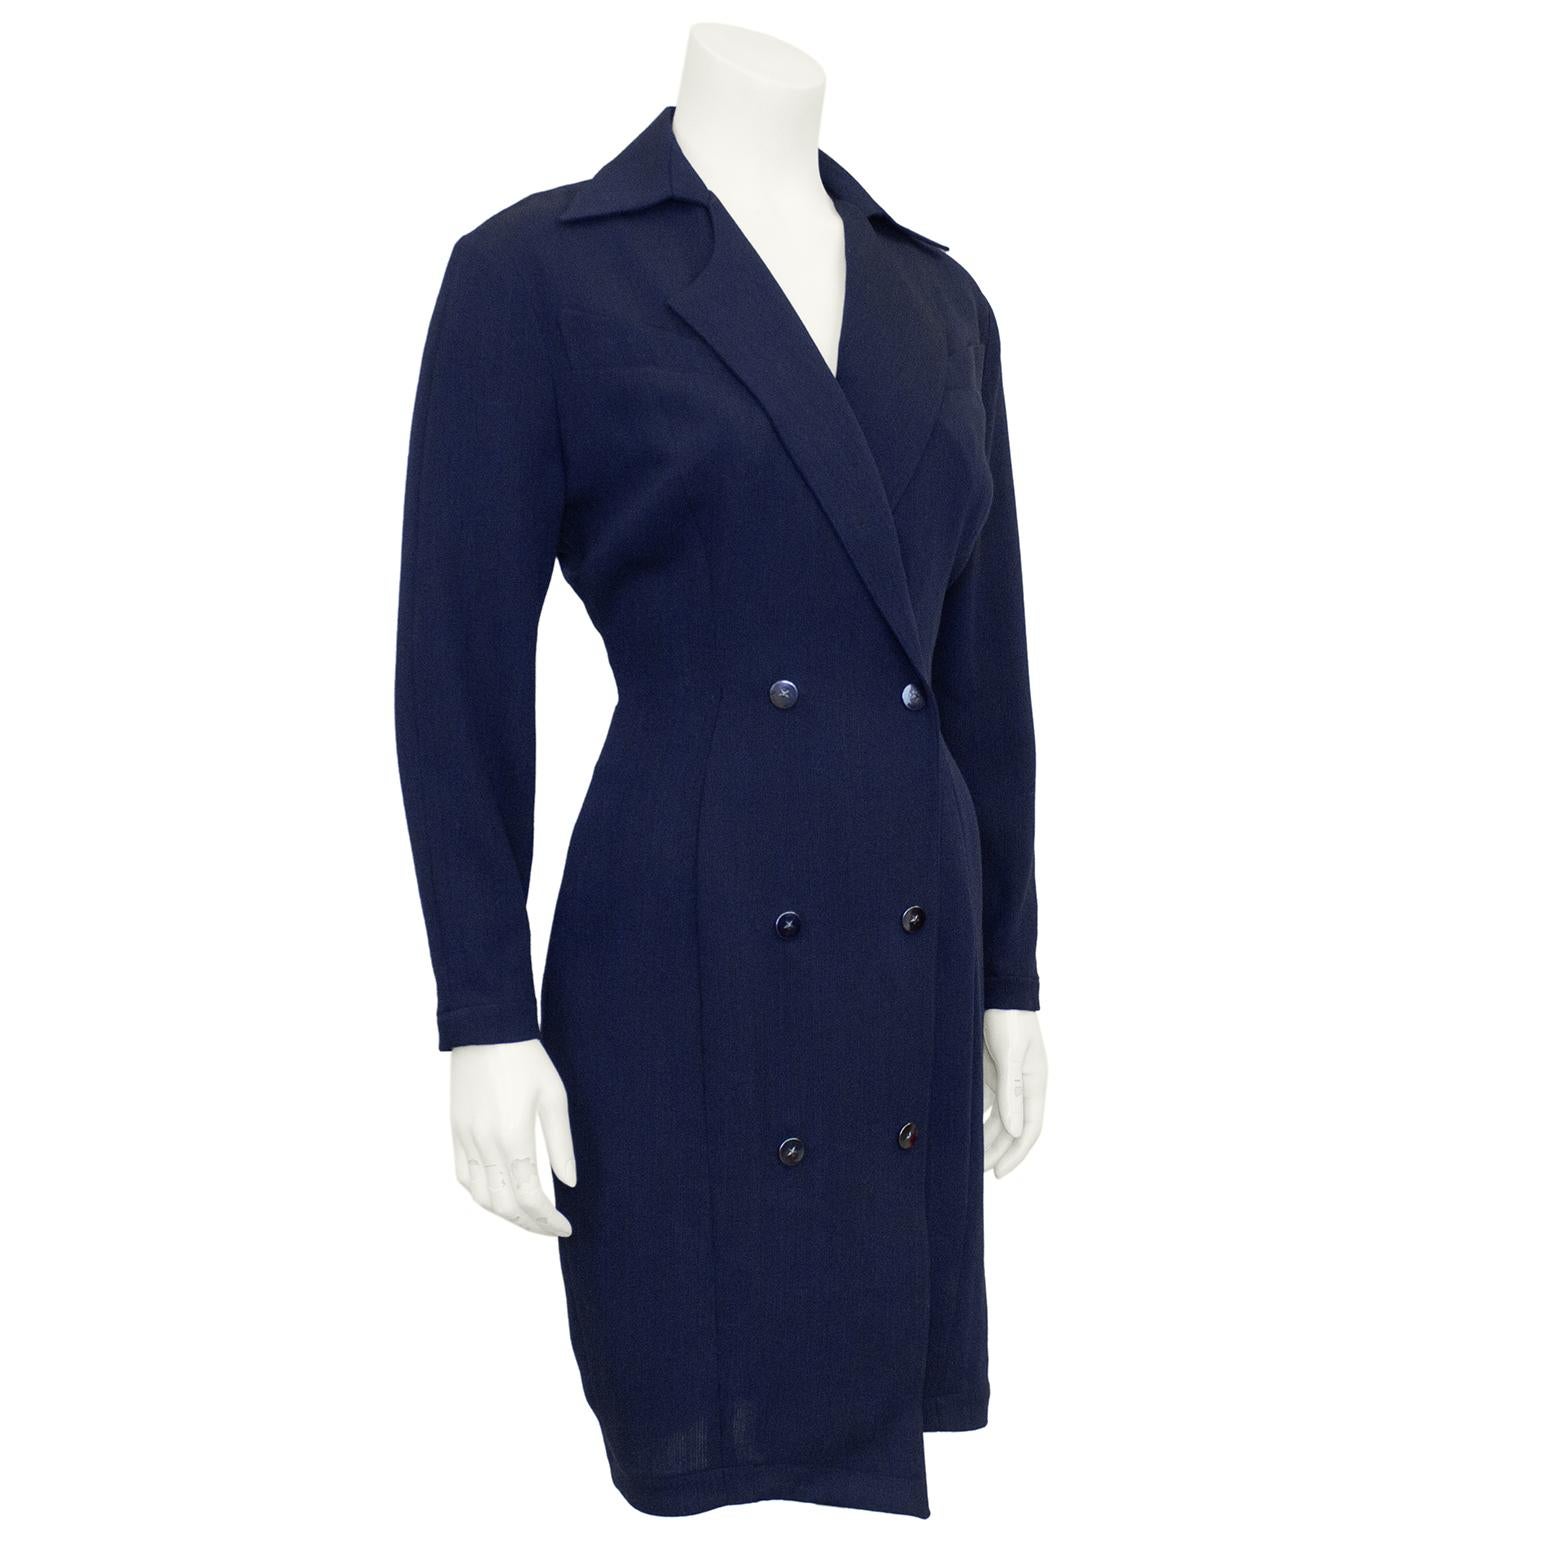 This 1980s navy blue wool coat dress is quintessential Thierry Mugler strong power dressing with its hyper feminine hourglass shape, narrow waist and broad shoulders. The double breasted dress features an oversized notched collar that creates a deep